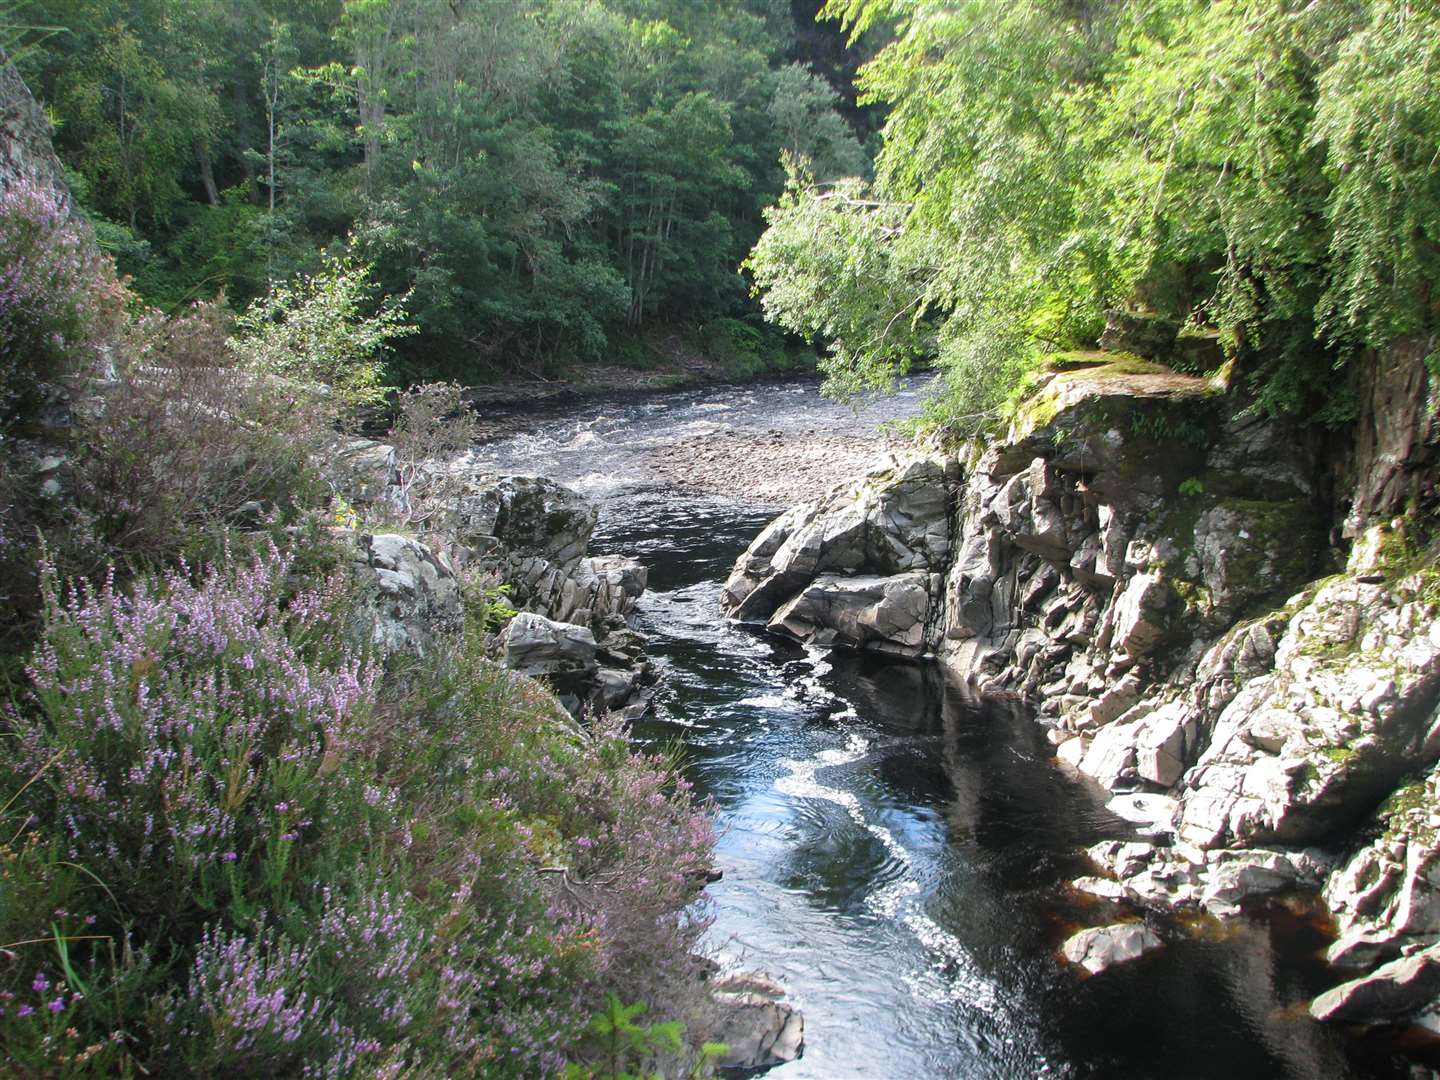 Randolph's Leap - at the entrance to the gorge on the River Findhorn. Photo by John Davidson.